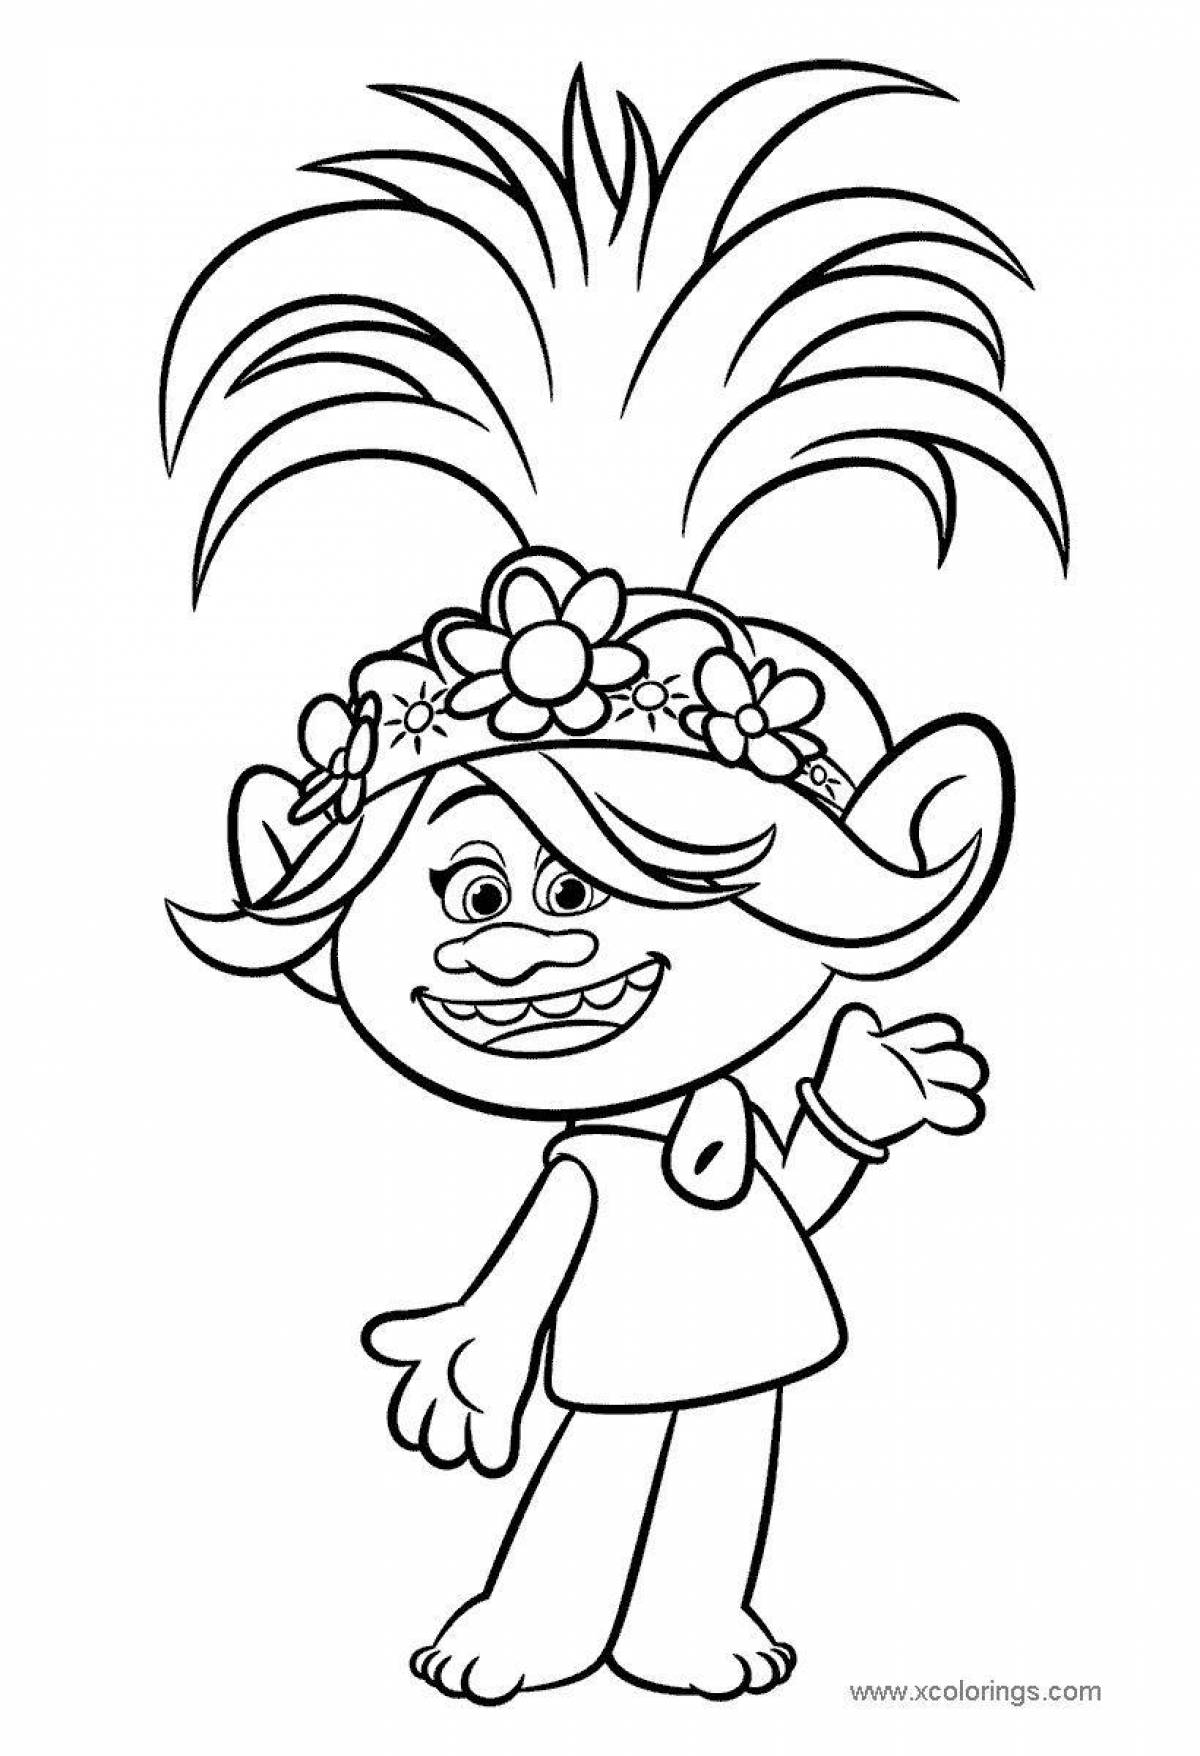 Radiant coloring page trolls world tour